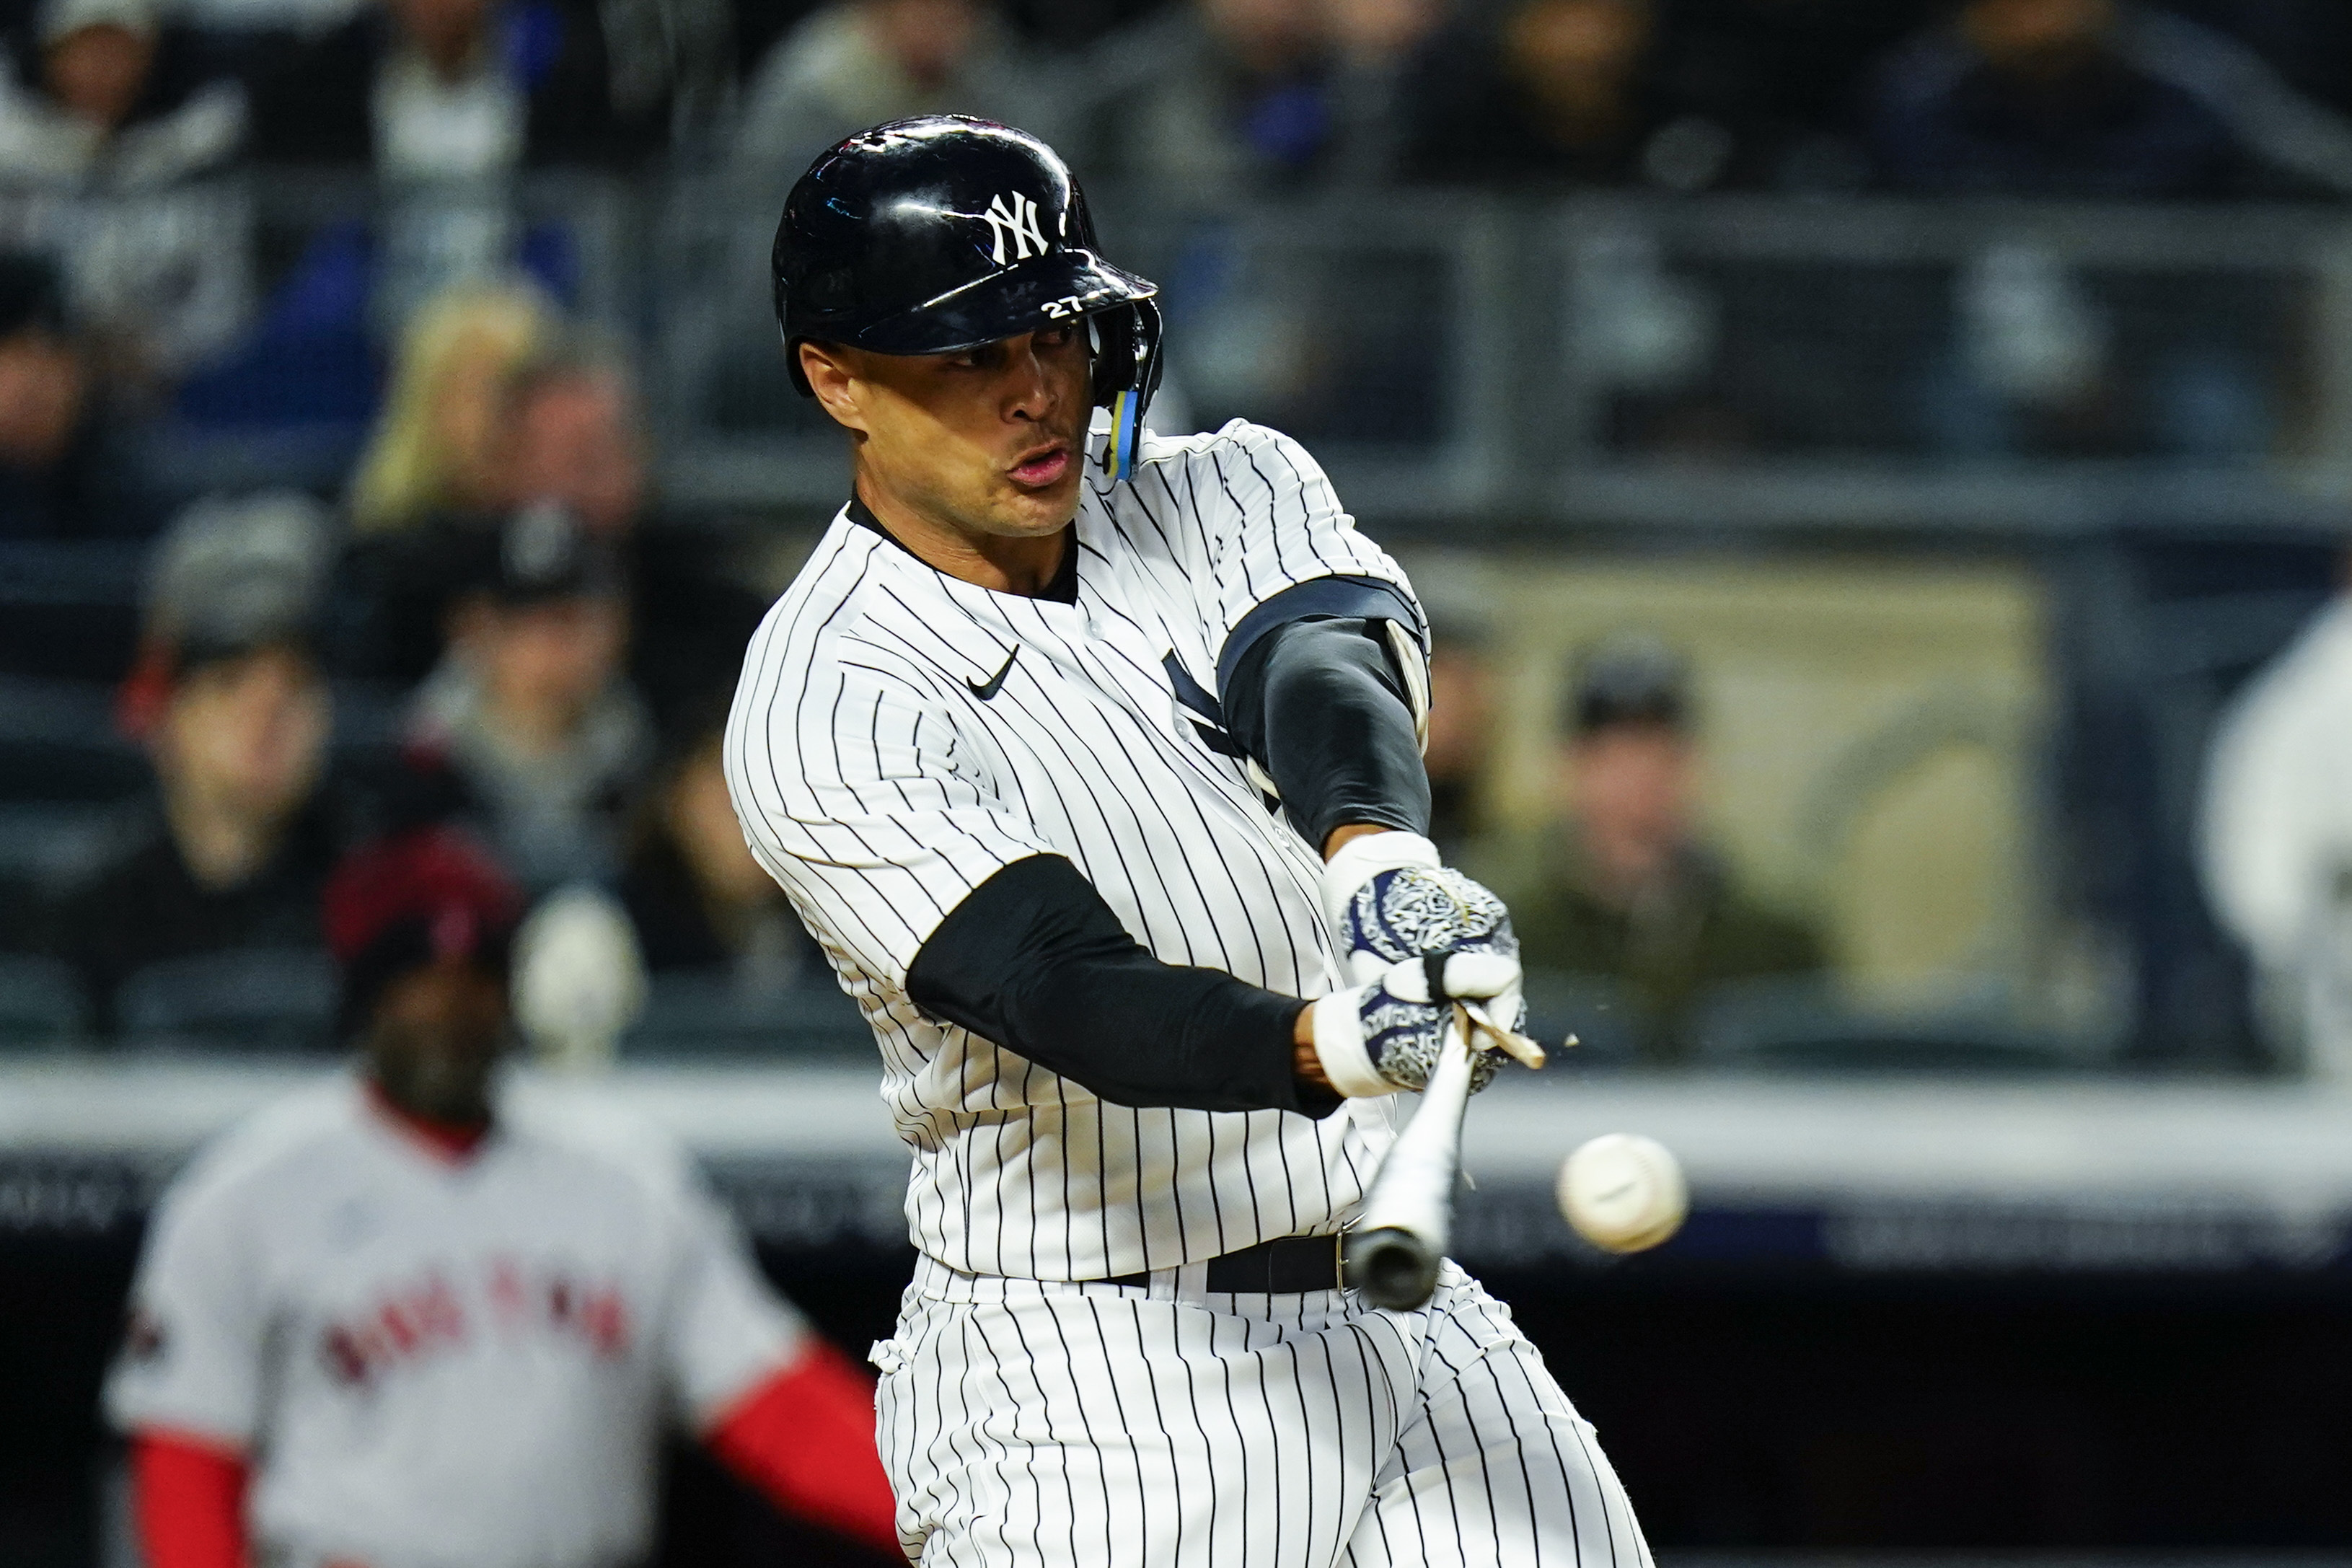 Giancarlo Stanton is off to a strange start with the Yankees